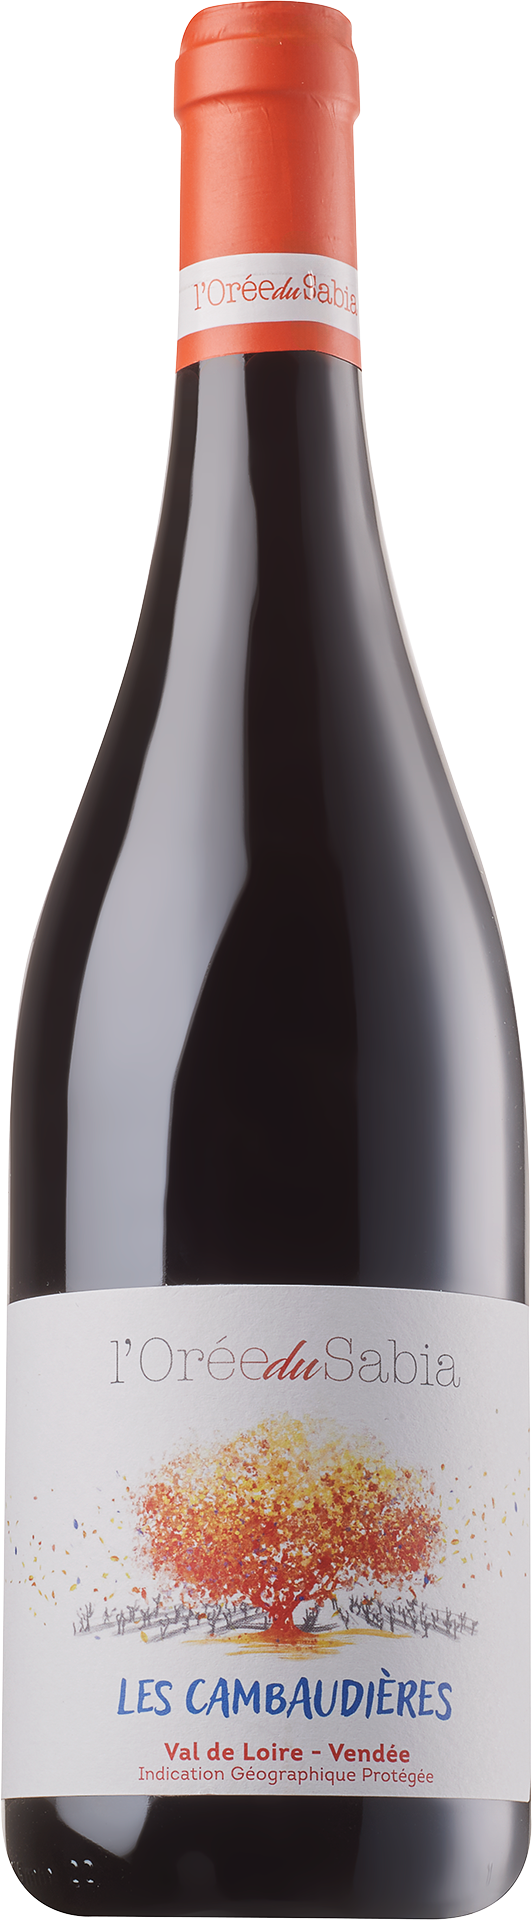 "Les Cambaudieres" Gamay Val de Loire IGP